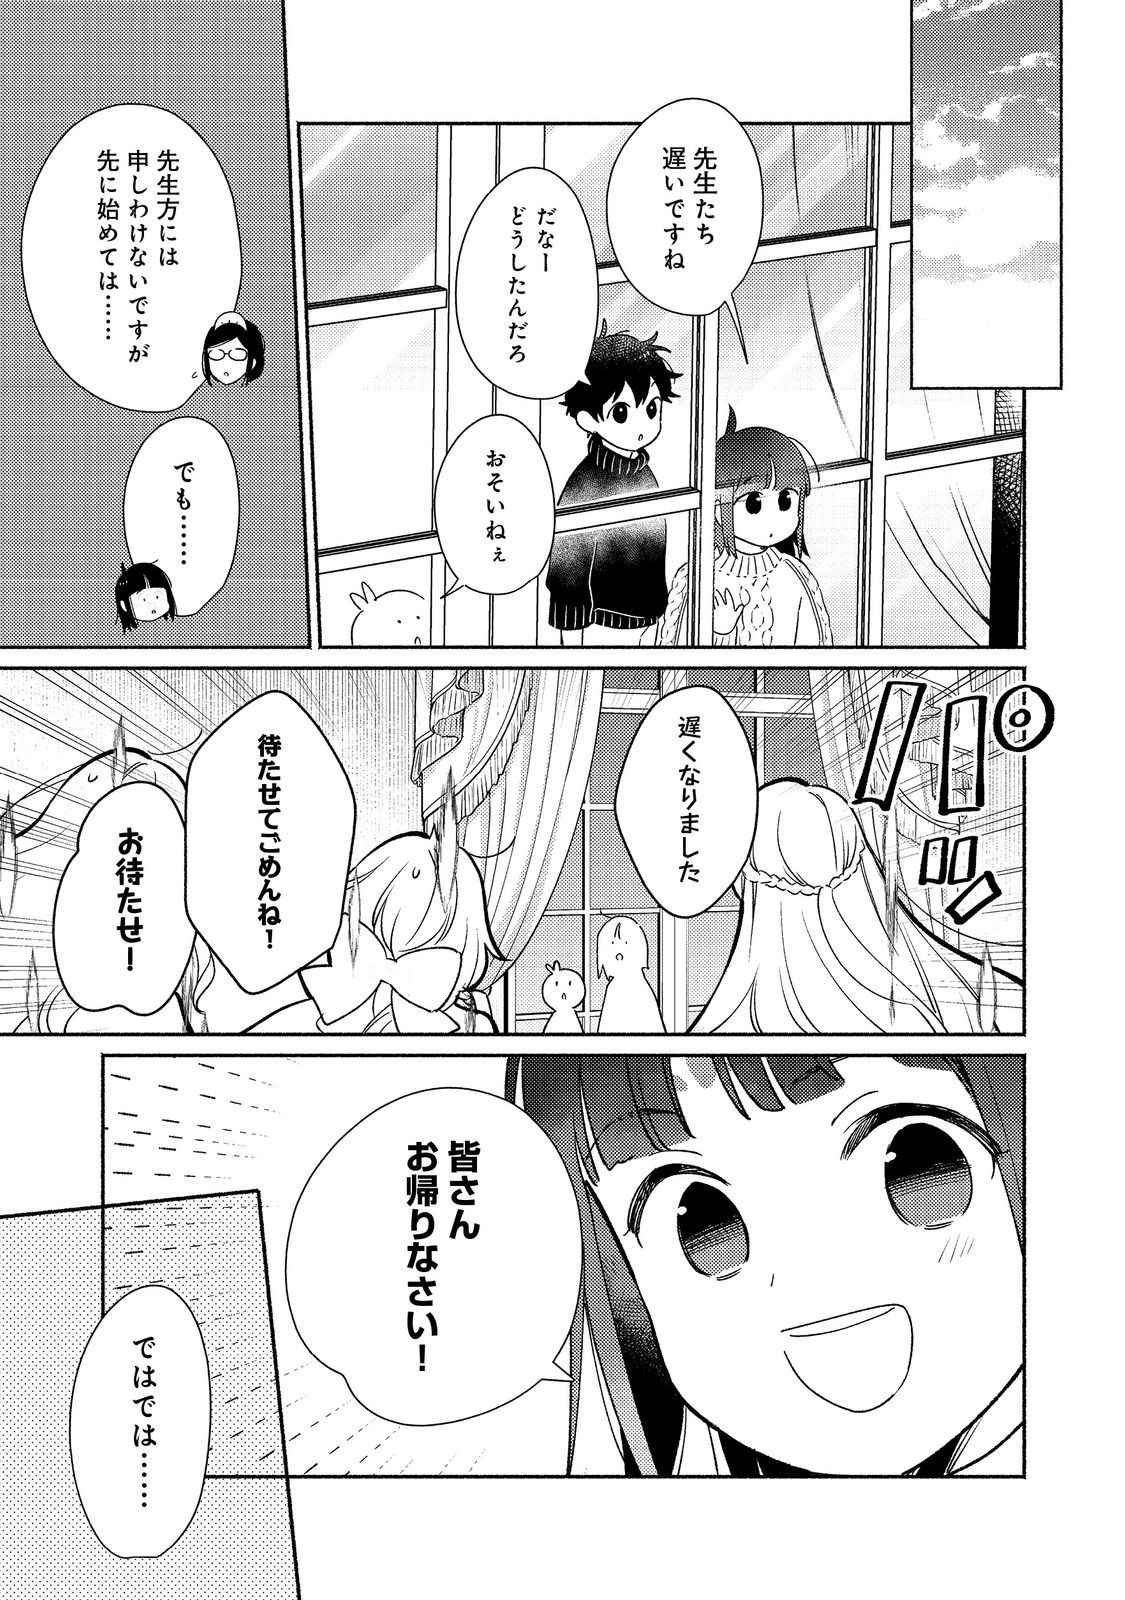 I’m the White Pig Nobleman 第26.1話 - Page 7